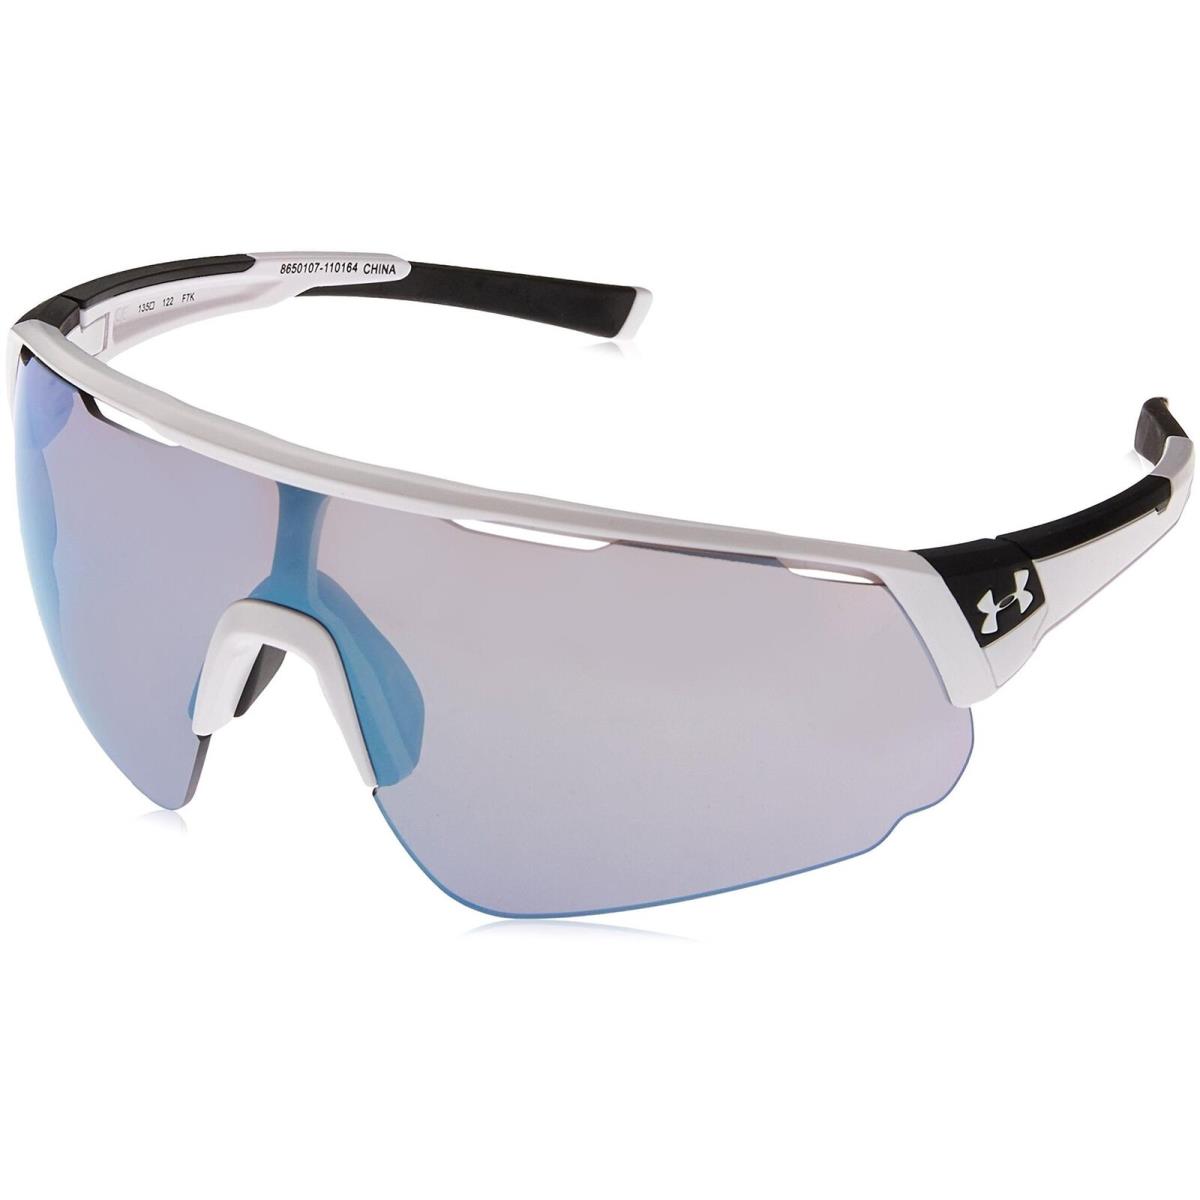 Under Armour Hook'd Blue Storm Polarized Sunglasses Review - YouTube